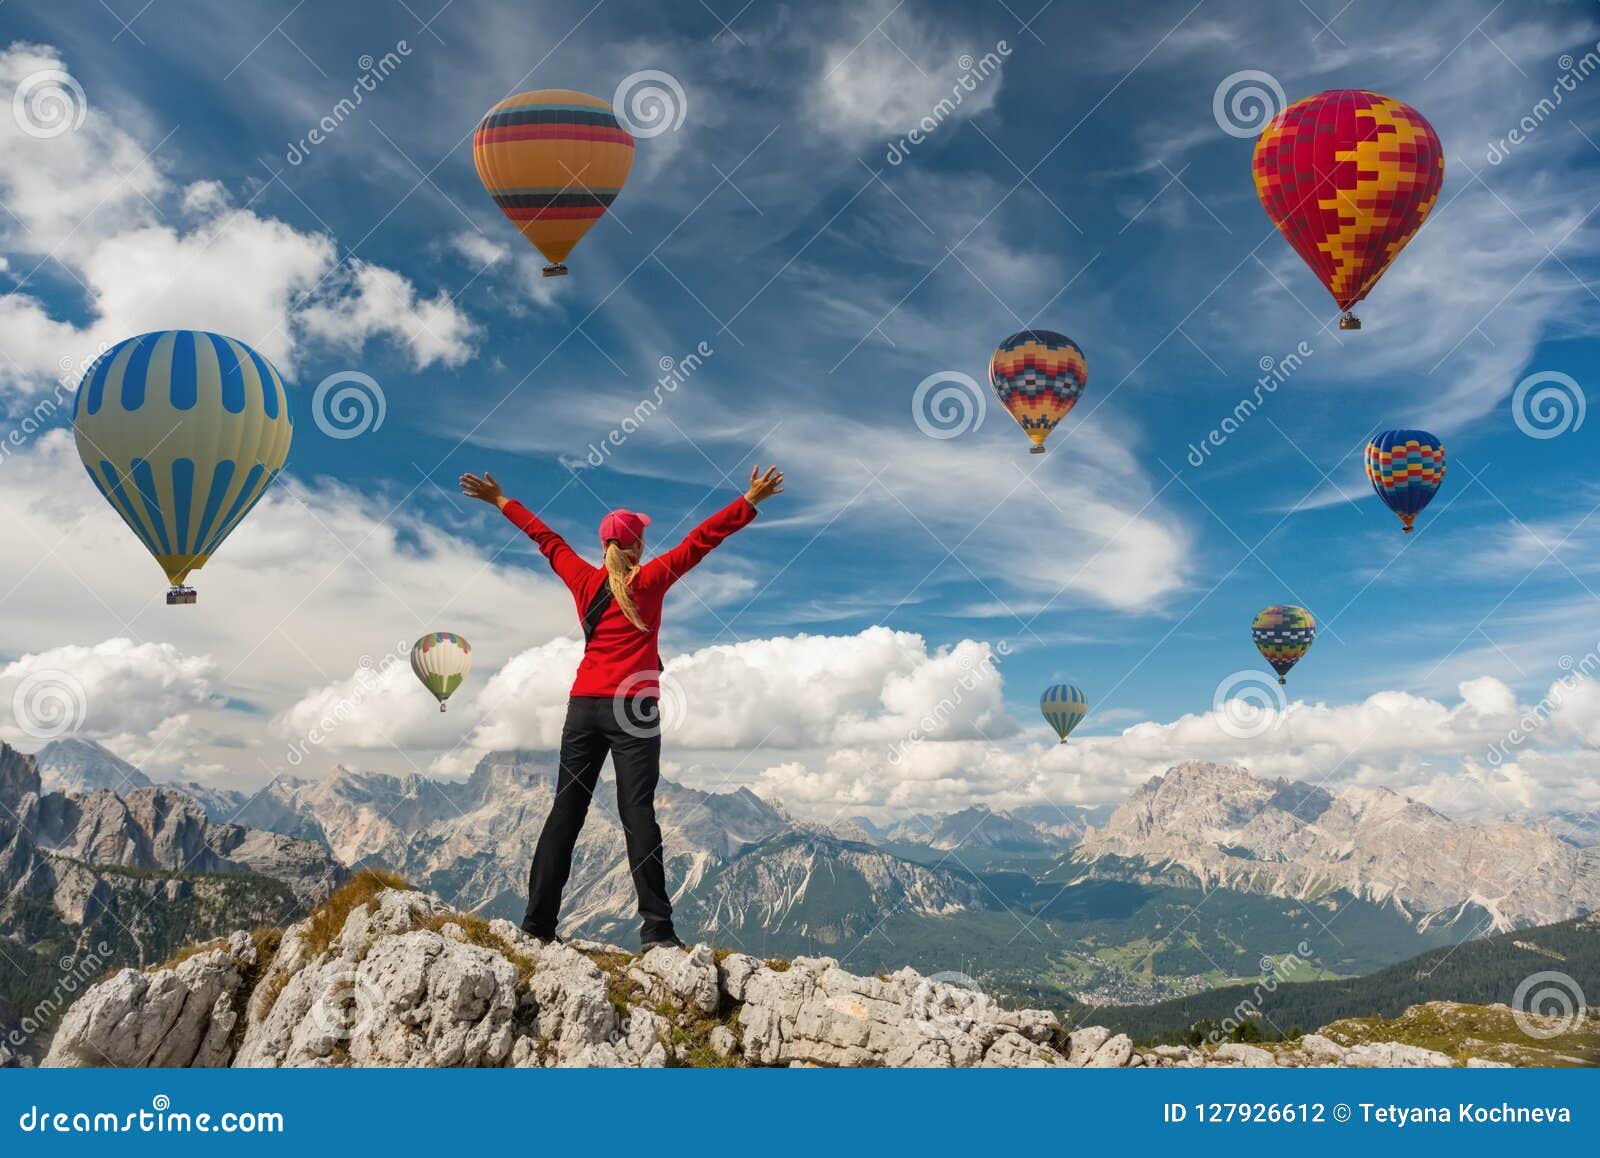 sporty girl and hot air balloons. freedom, achievement, achievement, happiness